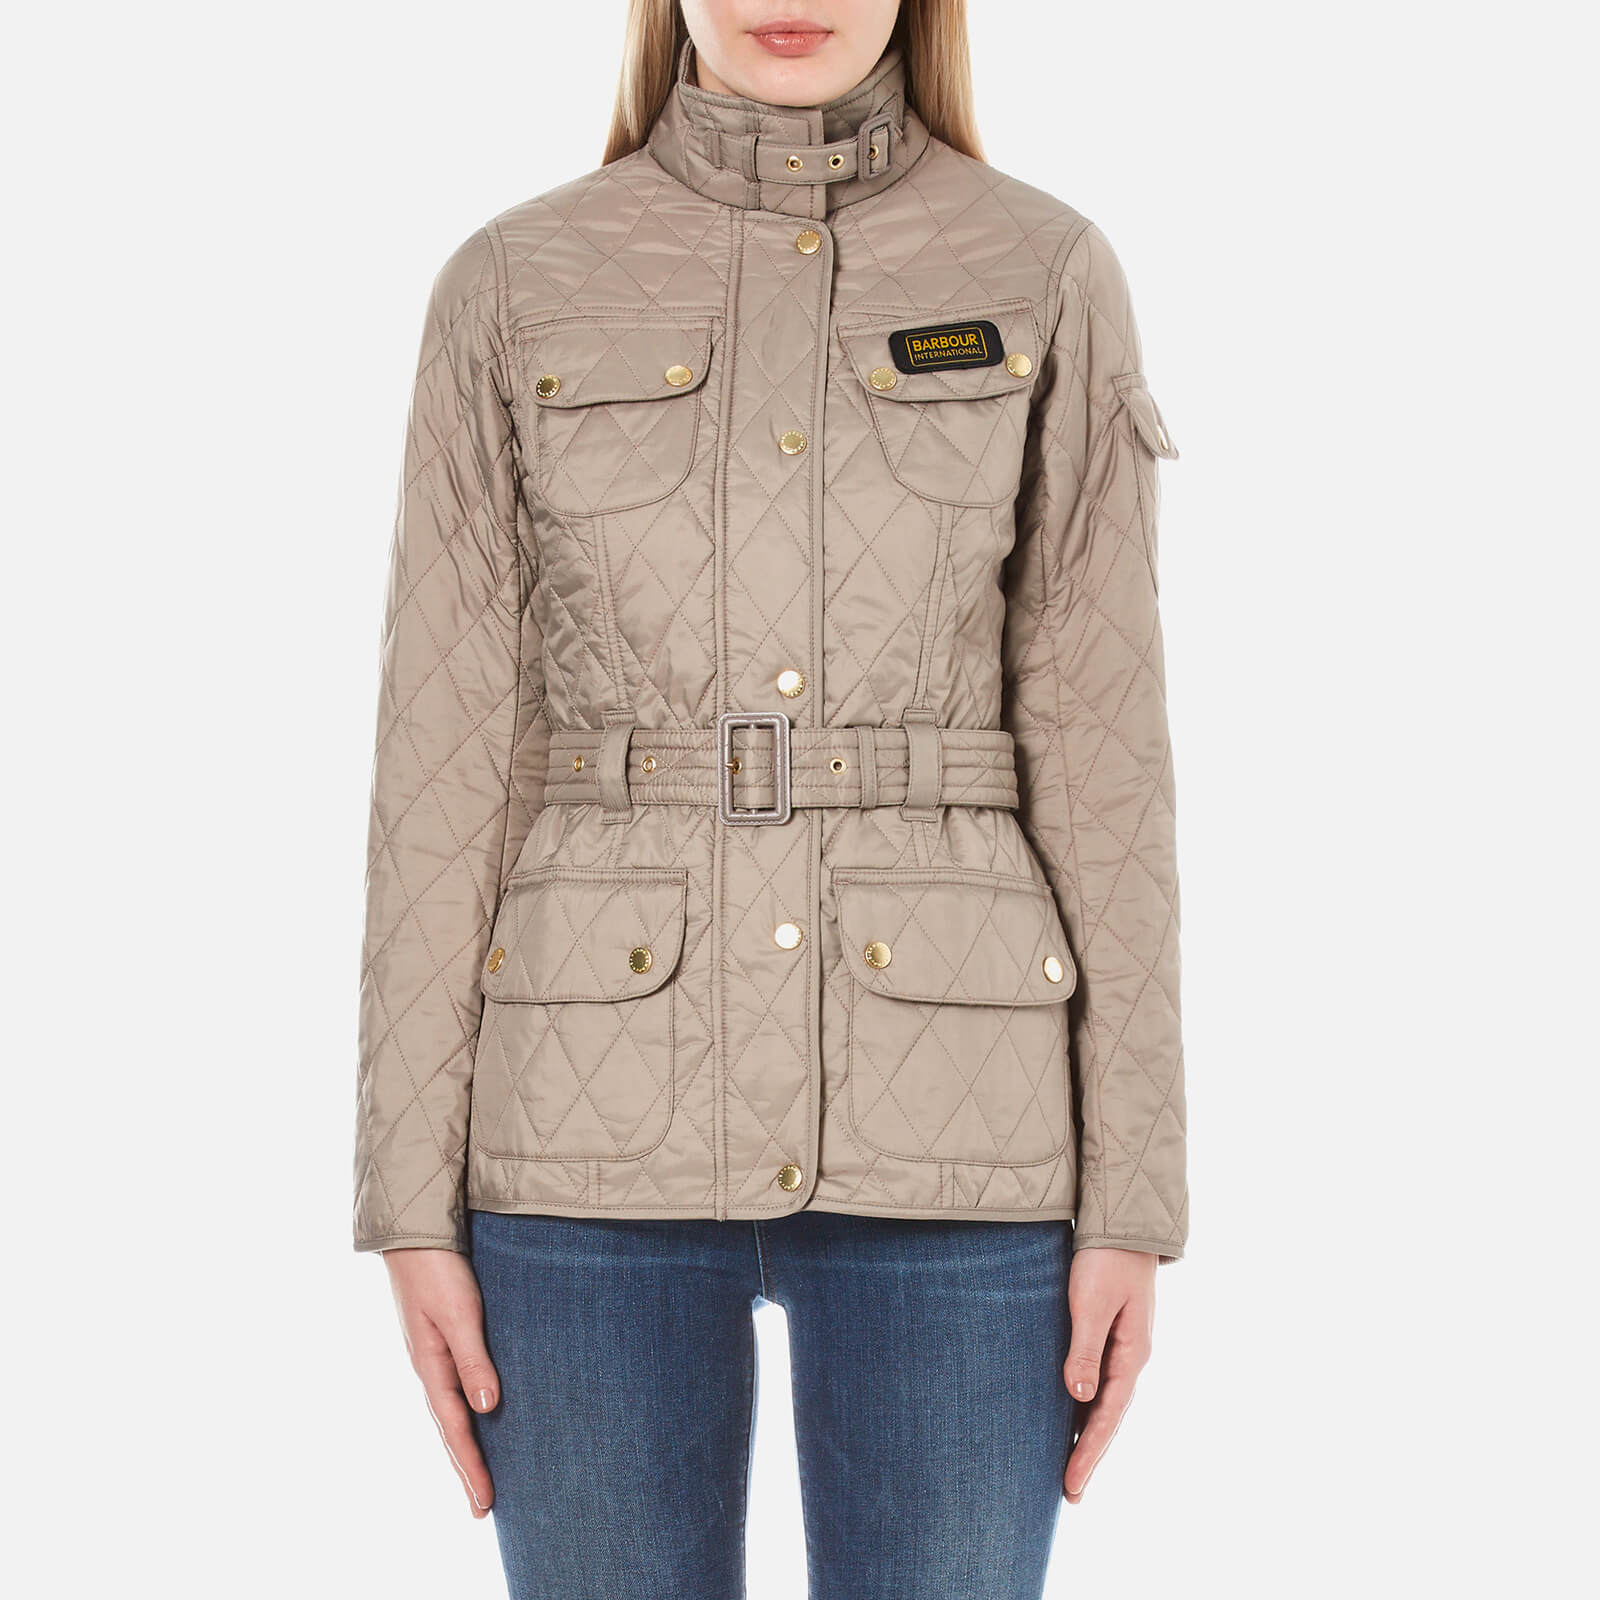 Barbour International Women's Quilt Jacket - Taupe Pearl - UK 8 - Cream